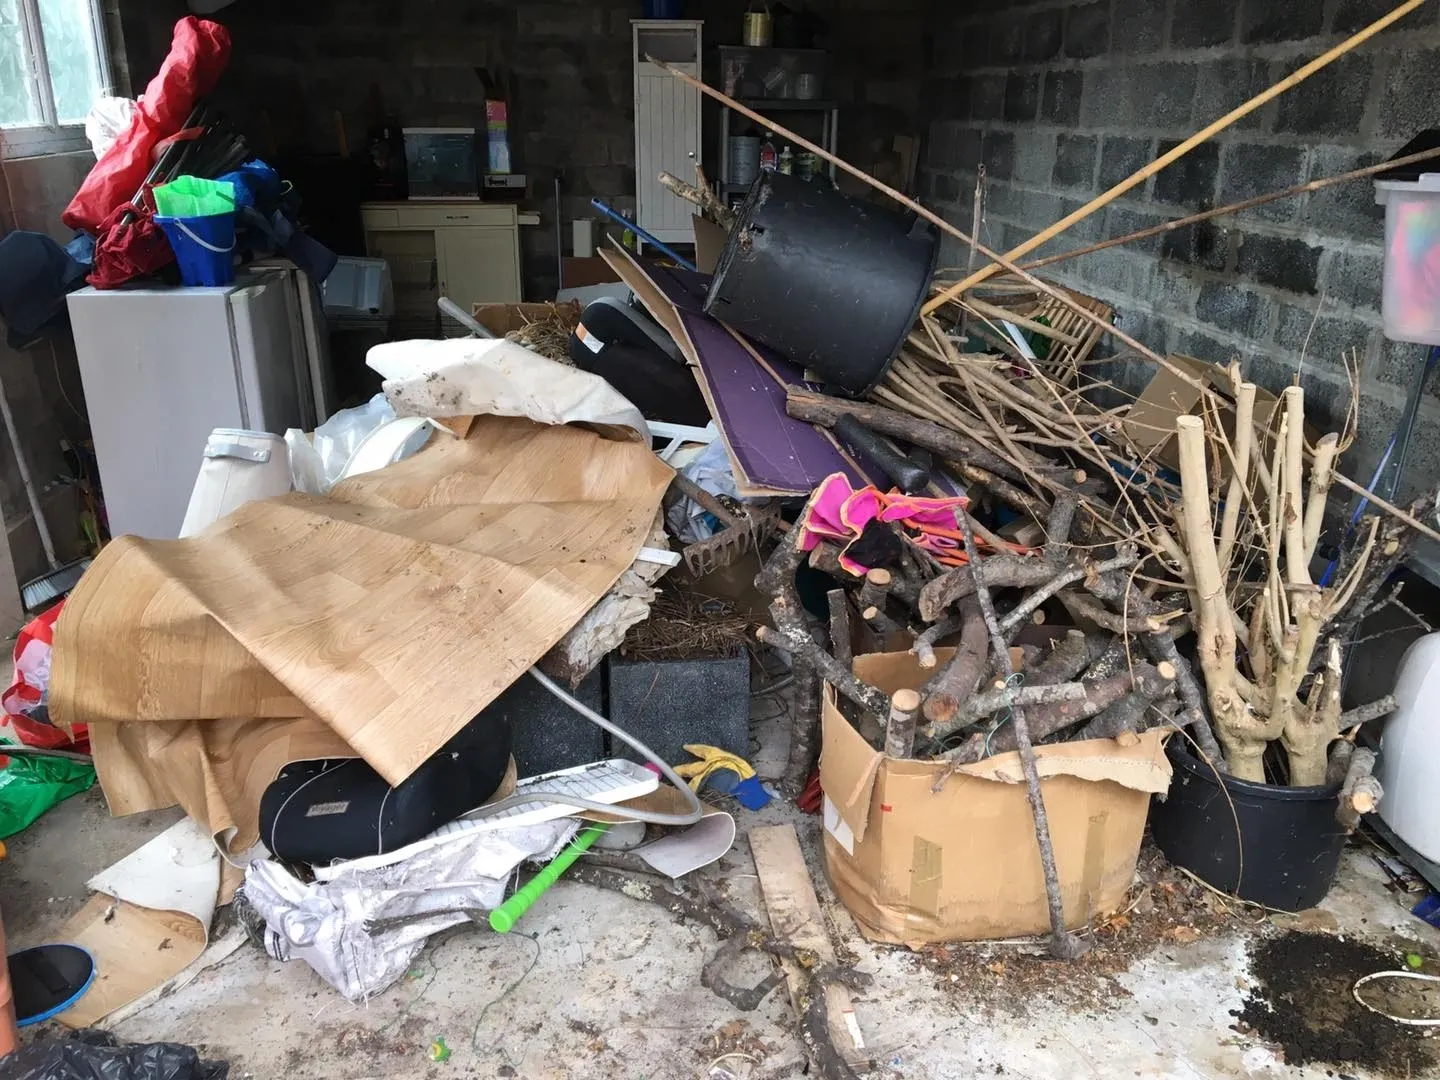 Photo of a small garage full of rubbish